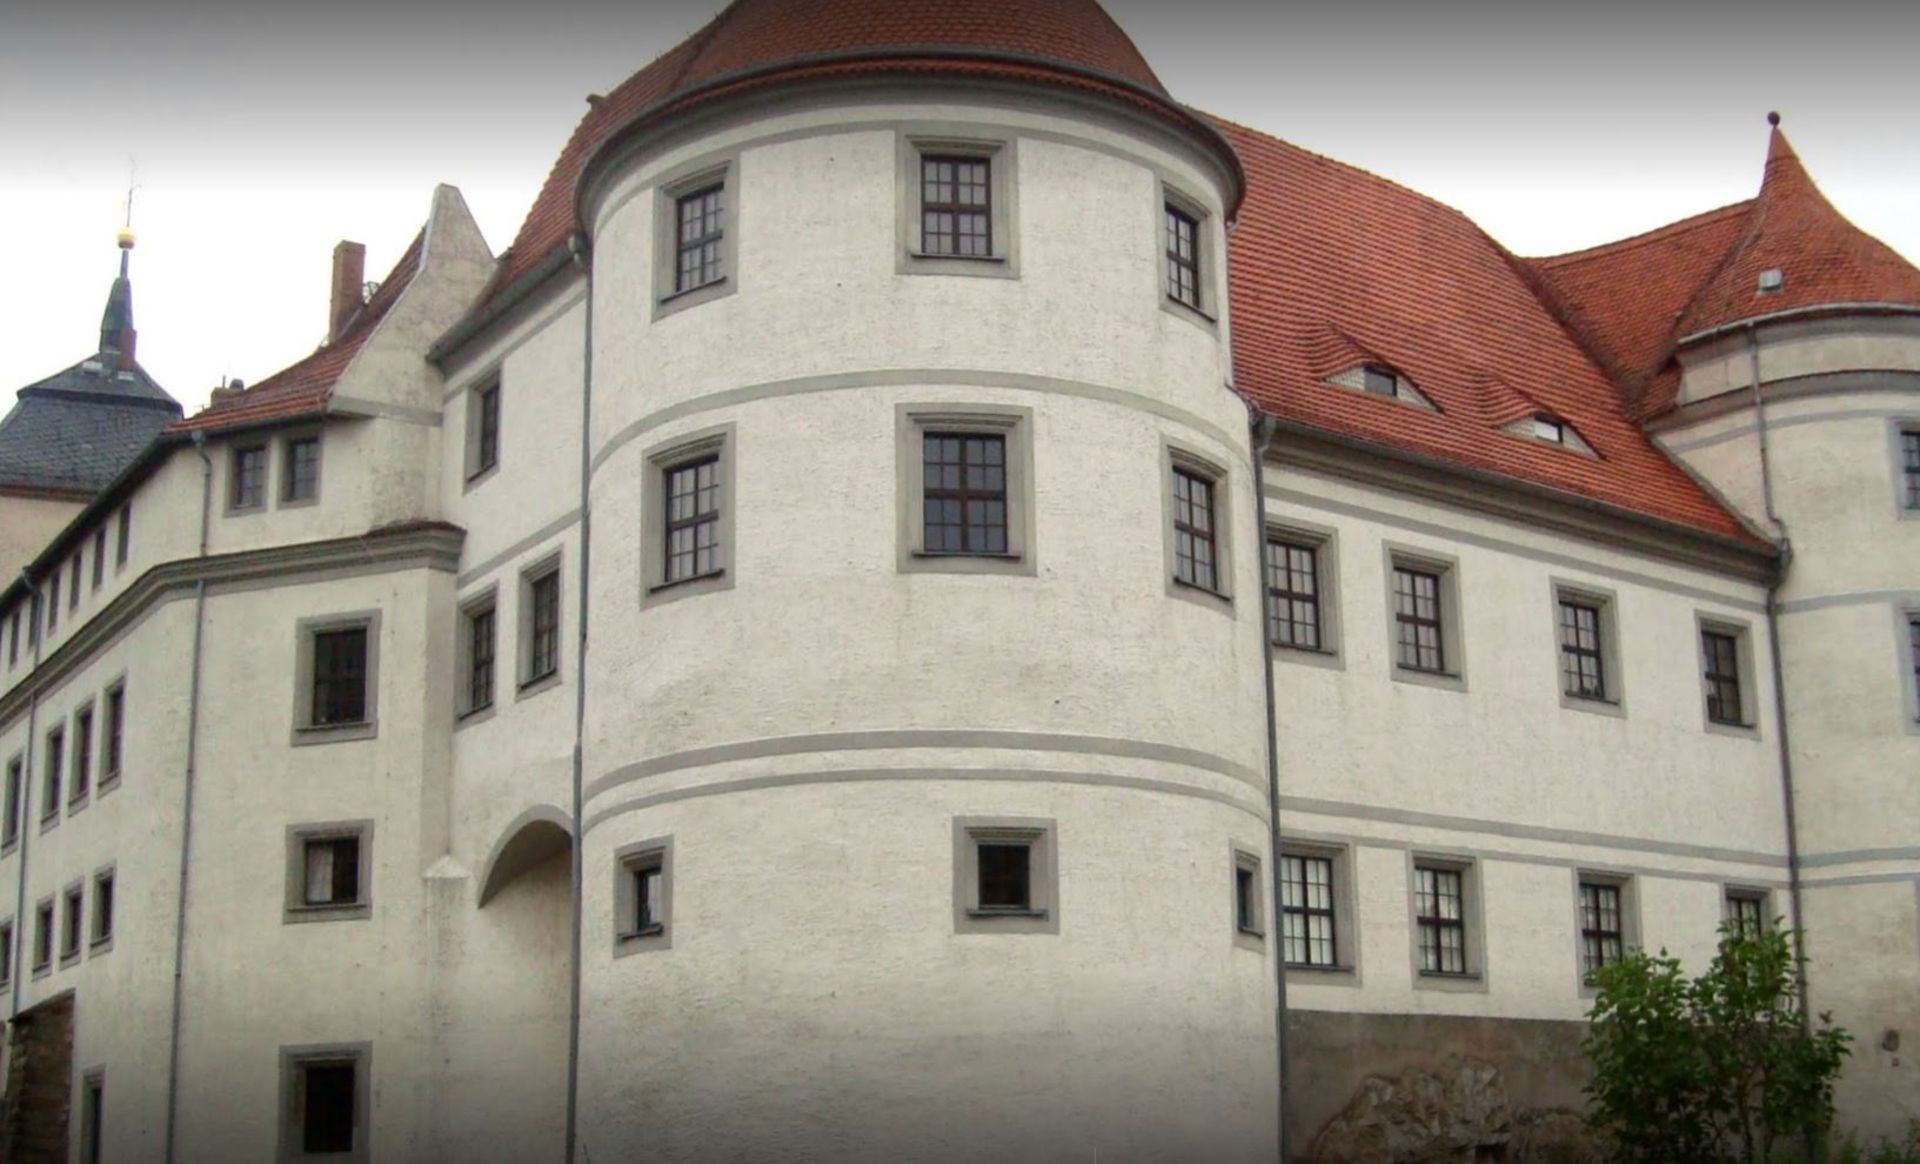 LARGE FORMER GUEST HOUSE IN NOSSEN, GERMANY - Image 46 of 47